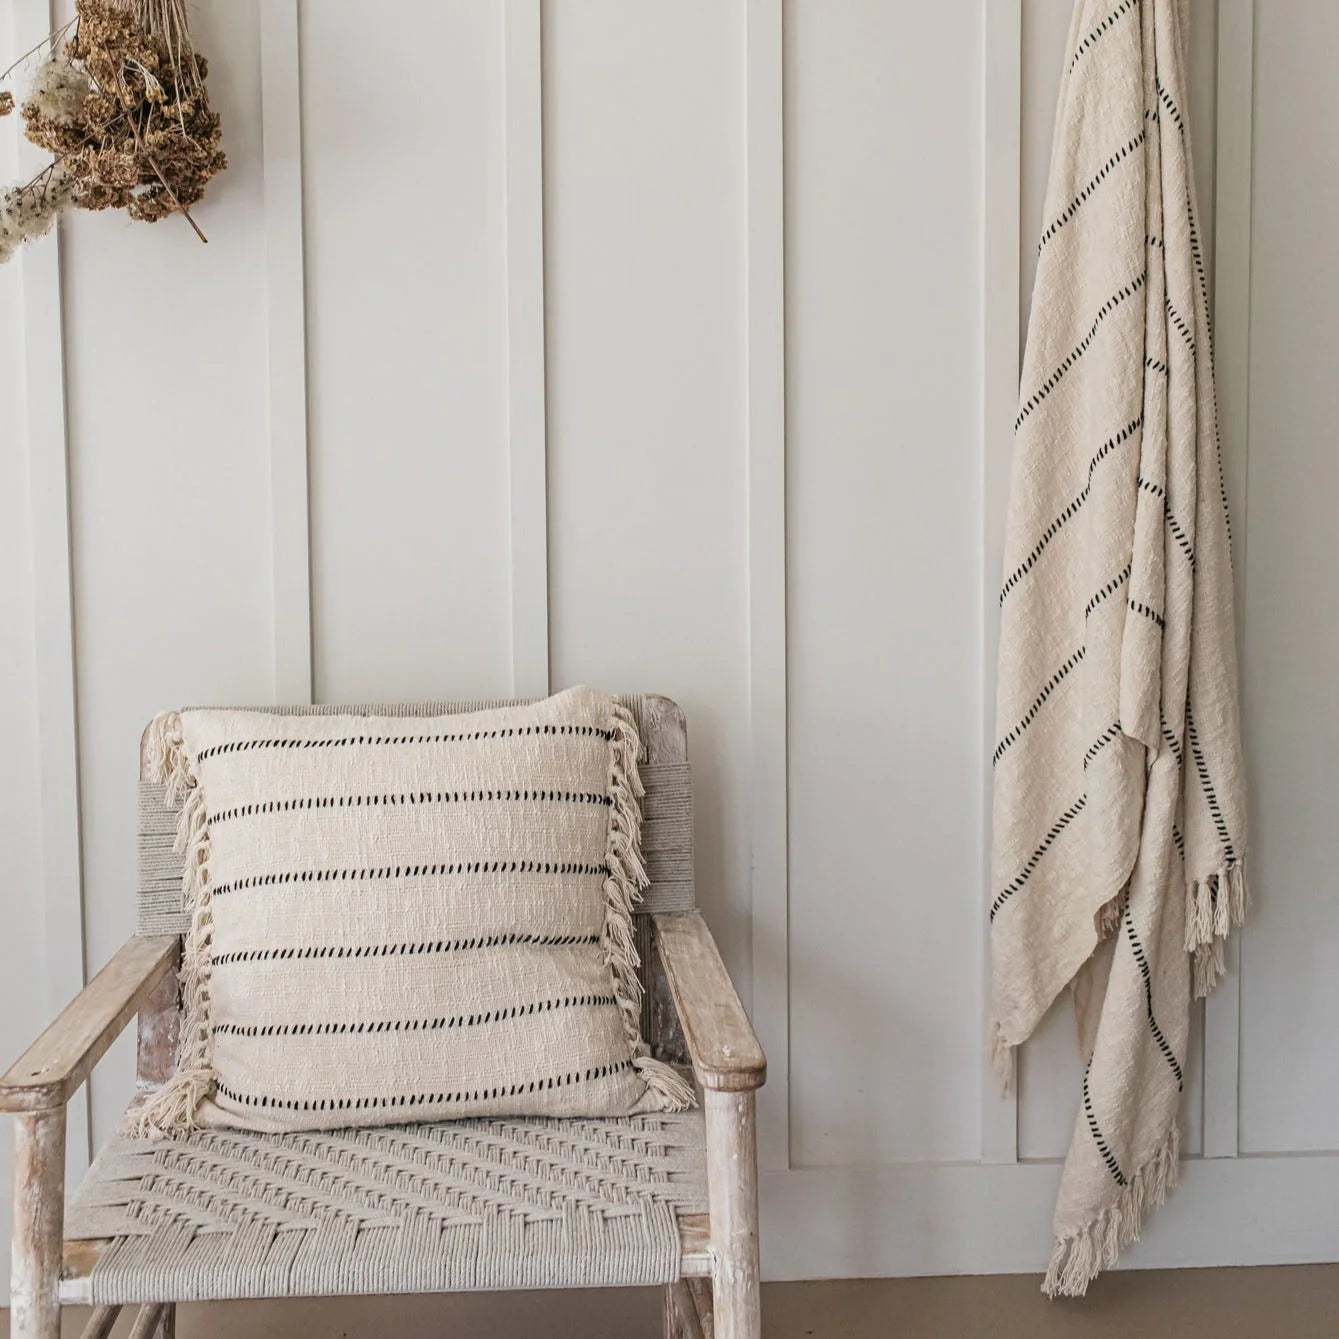 A striped linen cushion on a woven armchair, matching striped blanket hangs from the wall to the right.